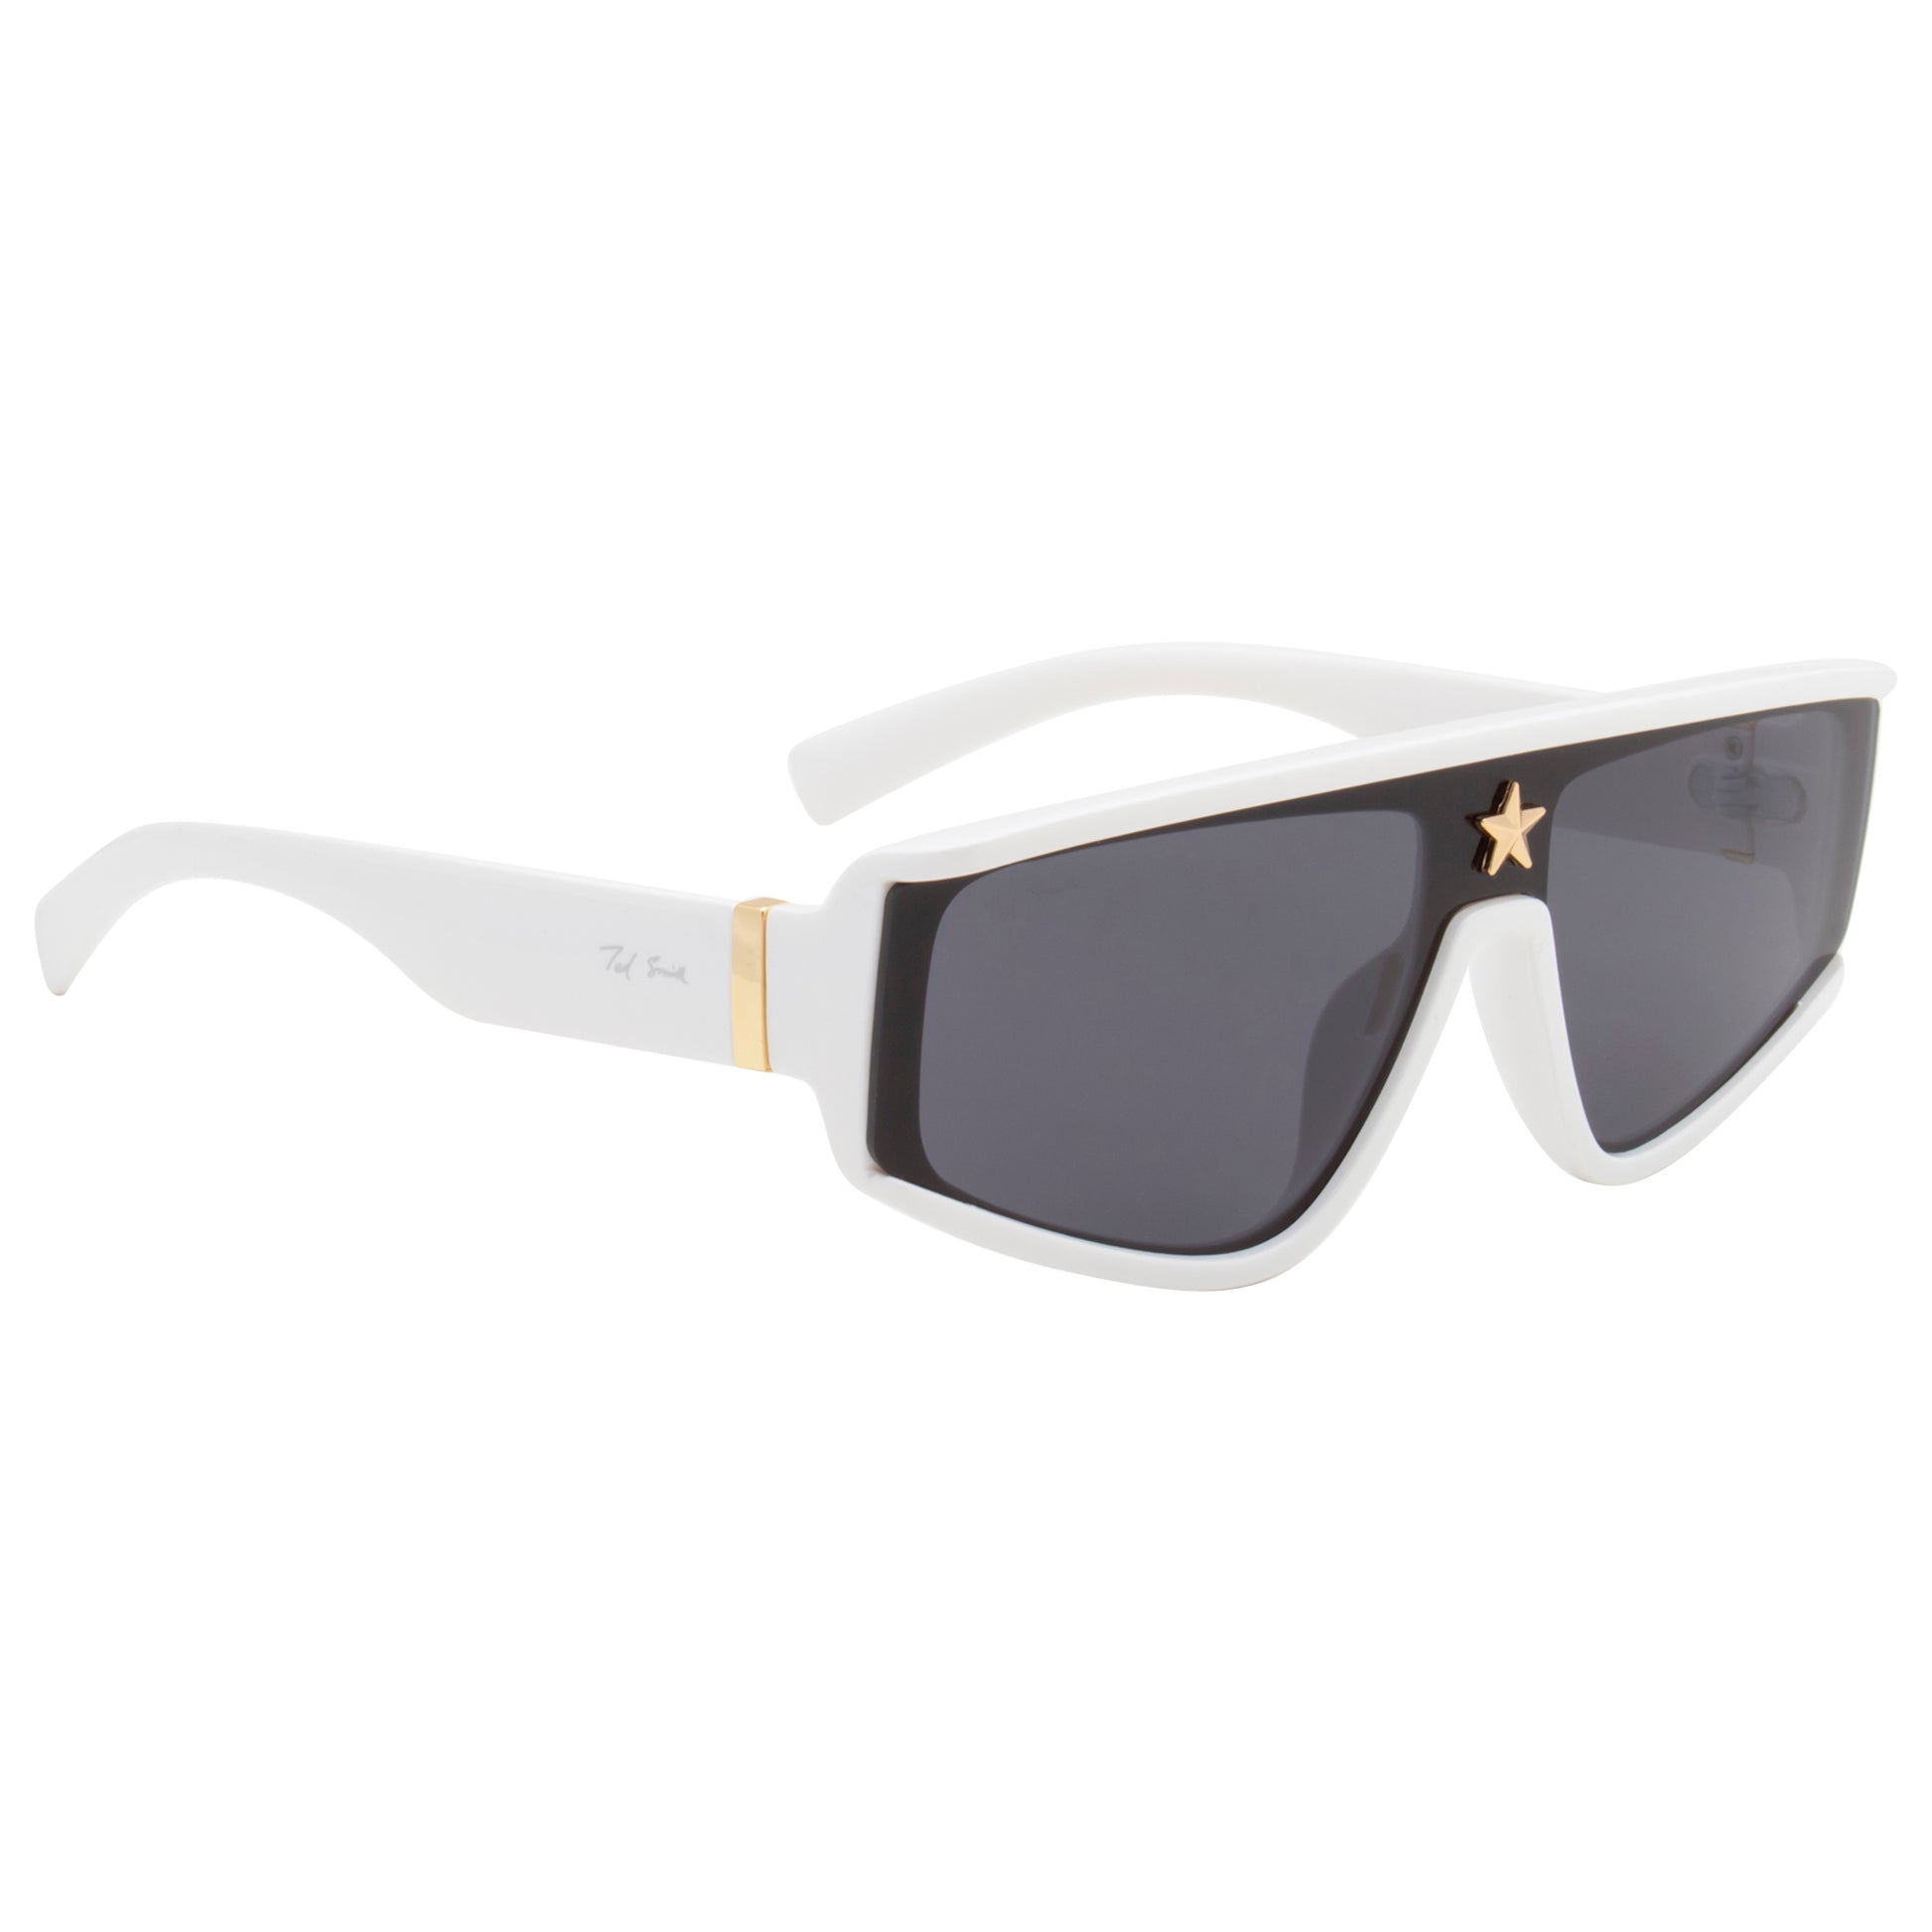 Louis Vuitton Millionaire Sunglasses Sunglasses, Limited in RED